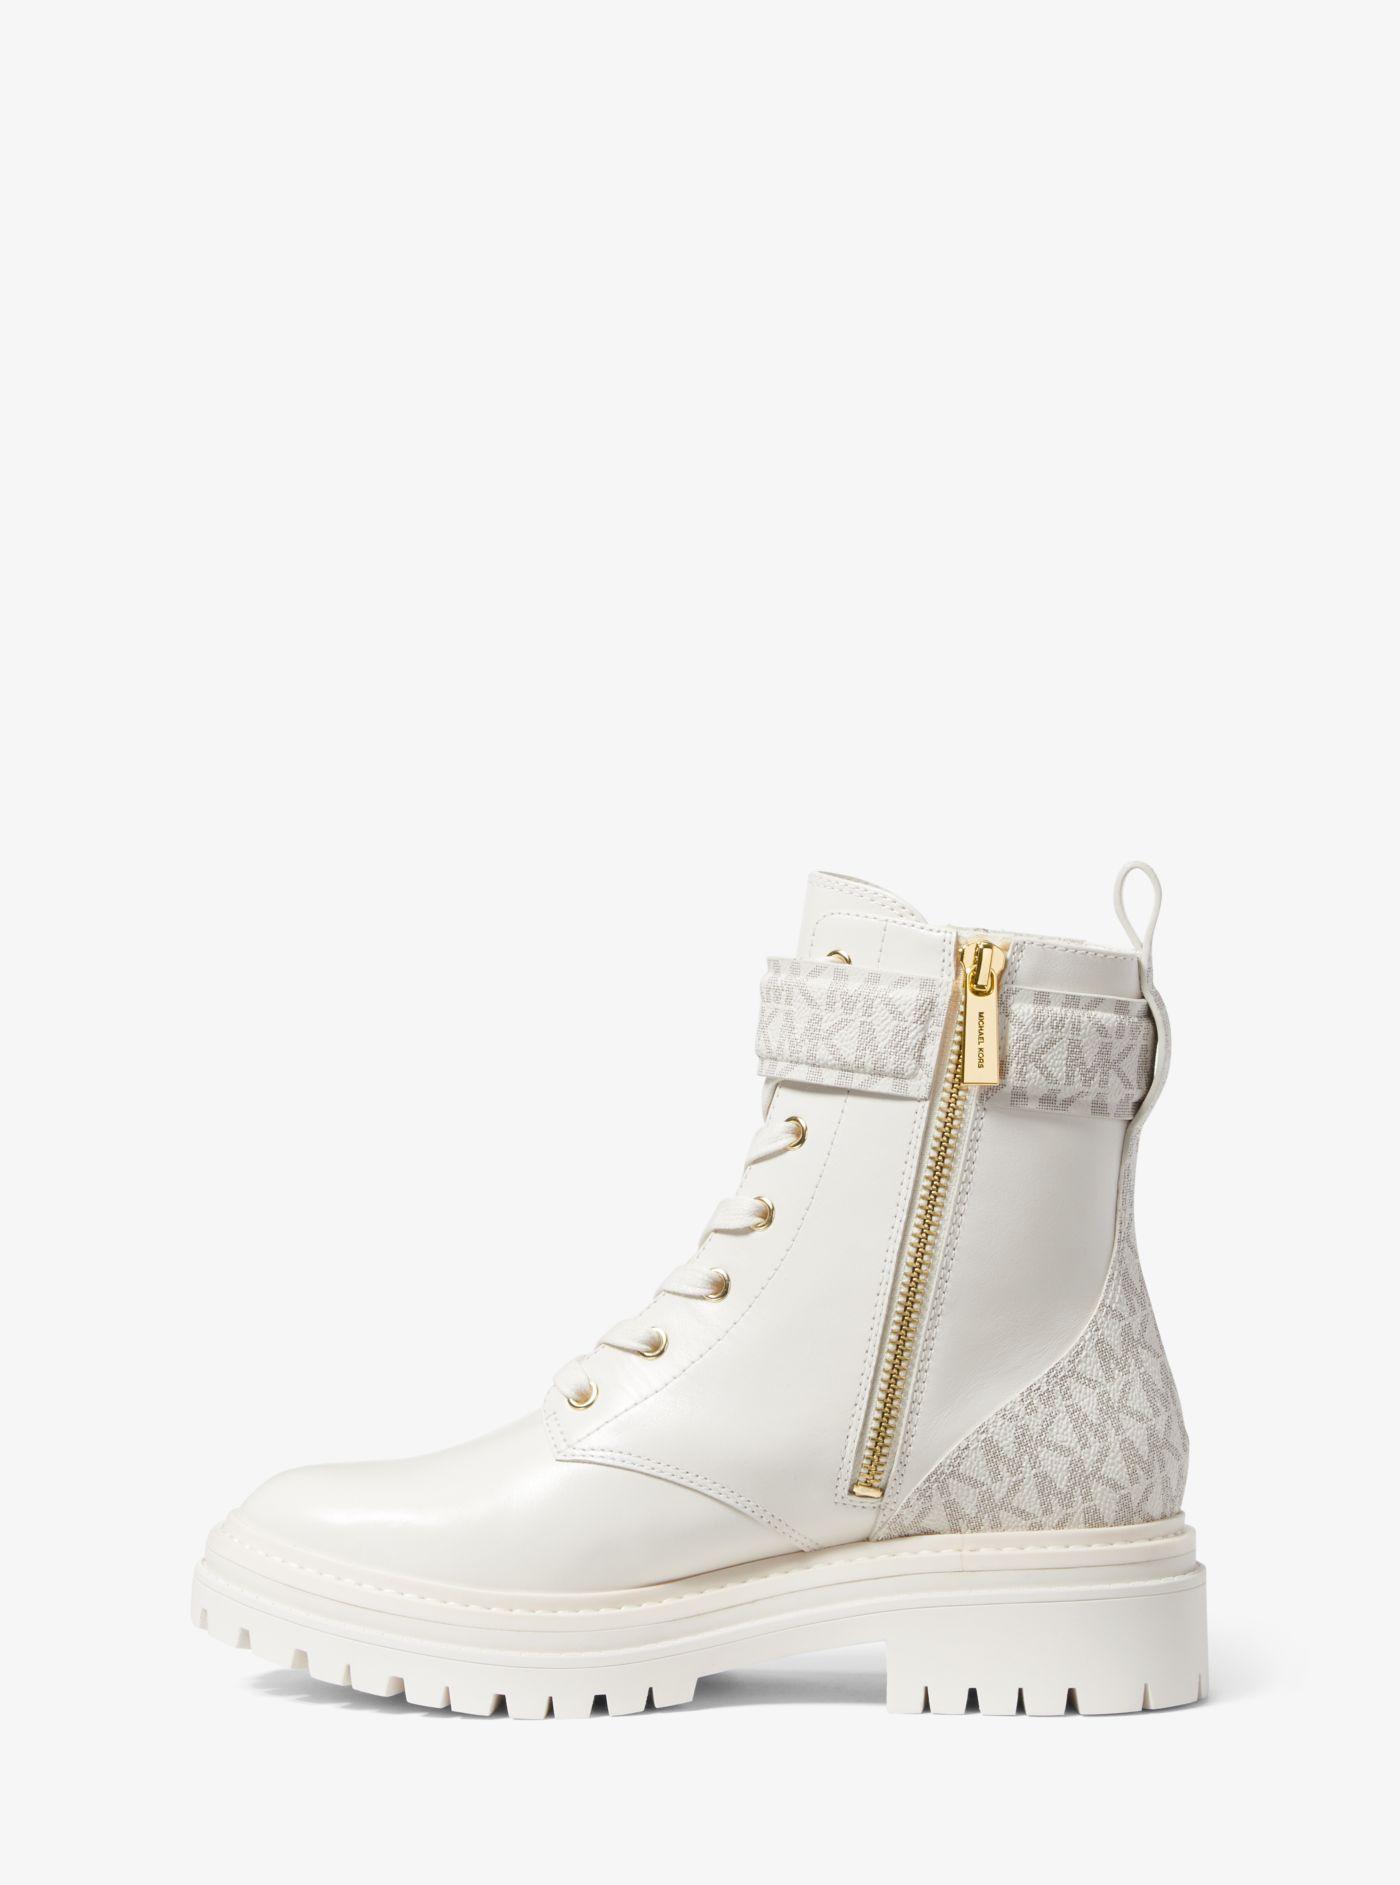 Michael Kors Stark Logo And Leather Combat Boot in Natural | Lyst